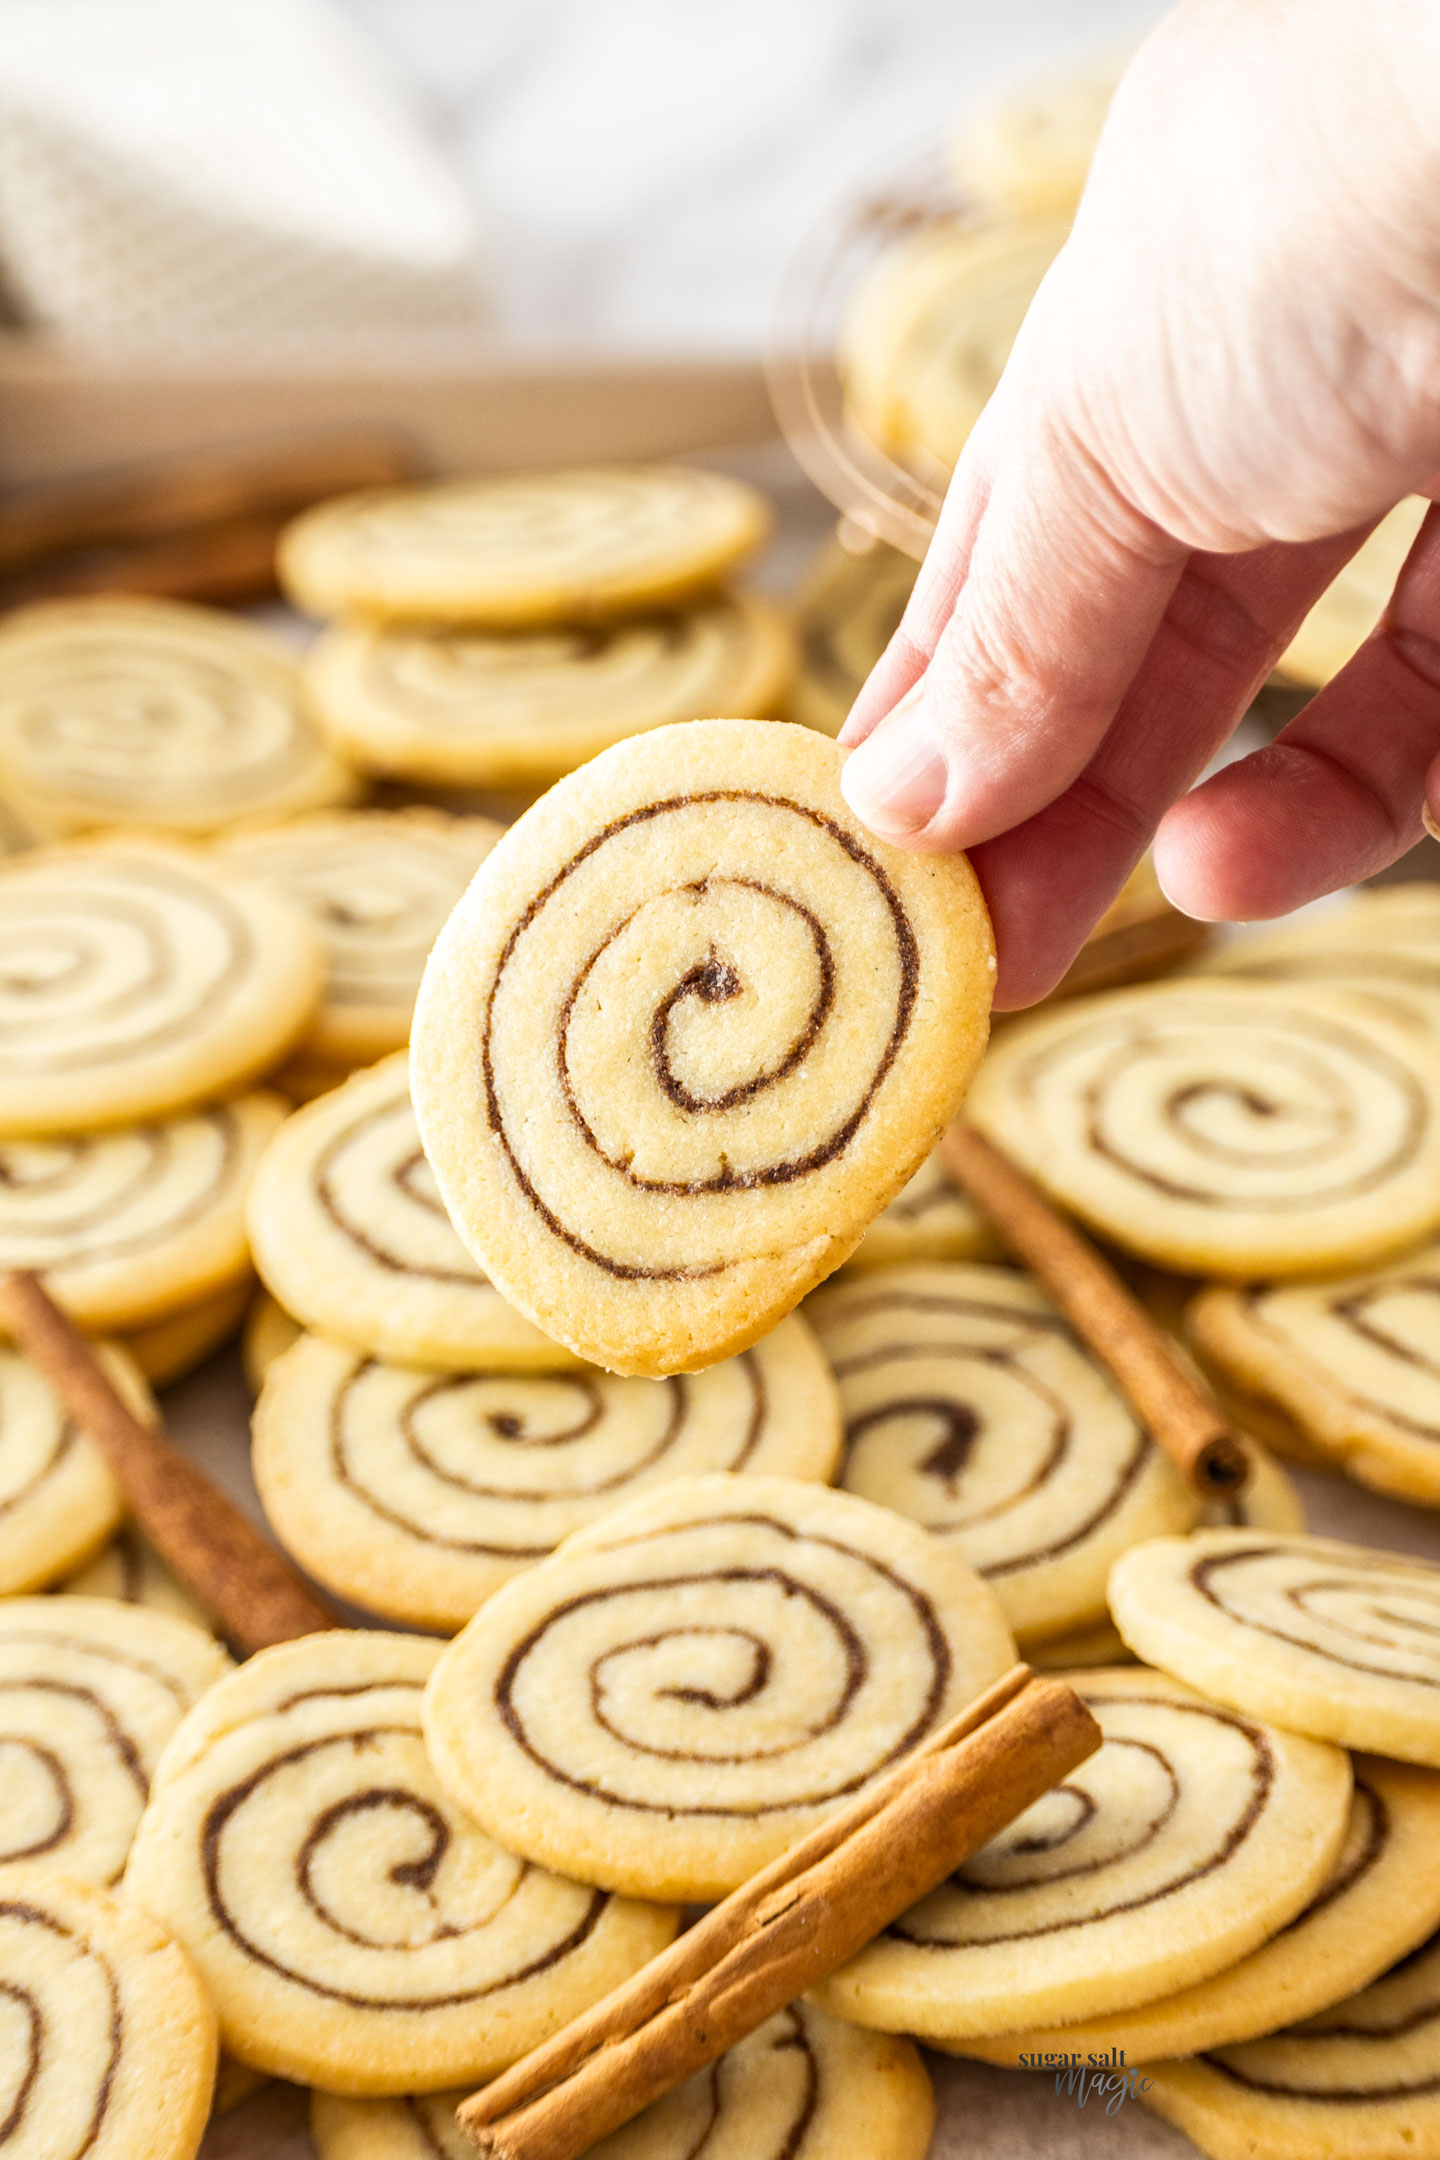 A hand holding a single cinnamon roll cookie.